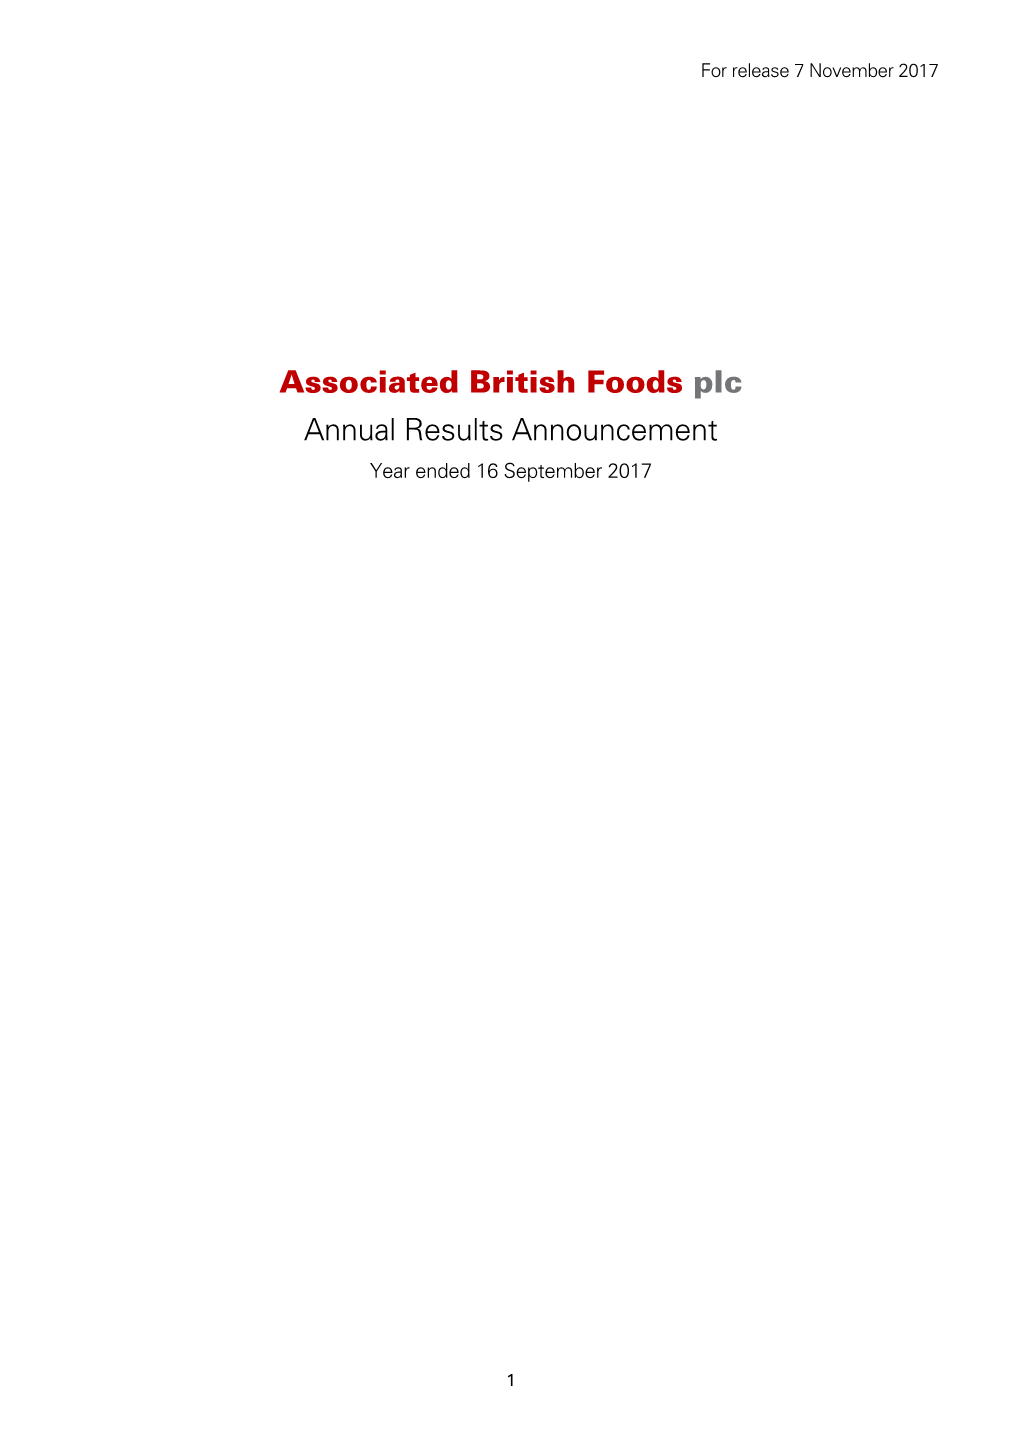 Associated British Foods Plc Annual Results Announcement Year Ended 16 September 2017